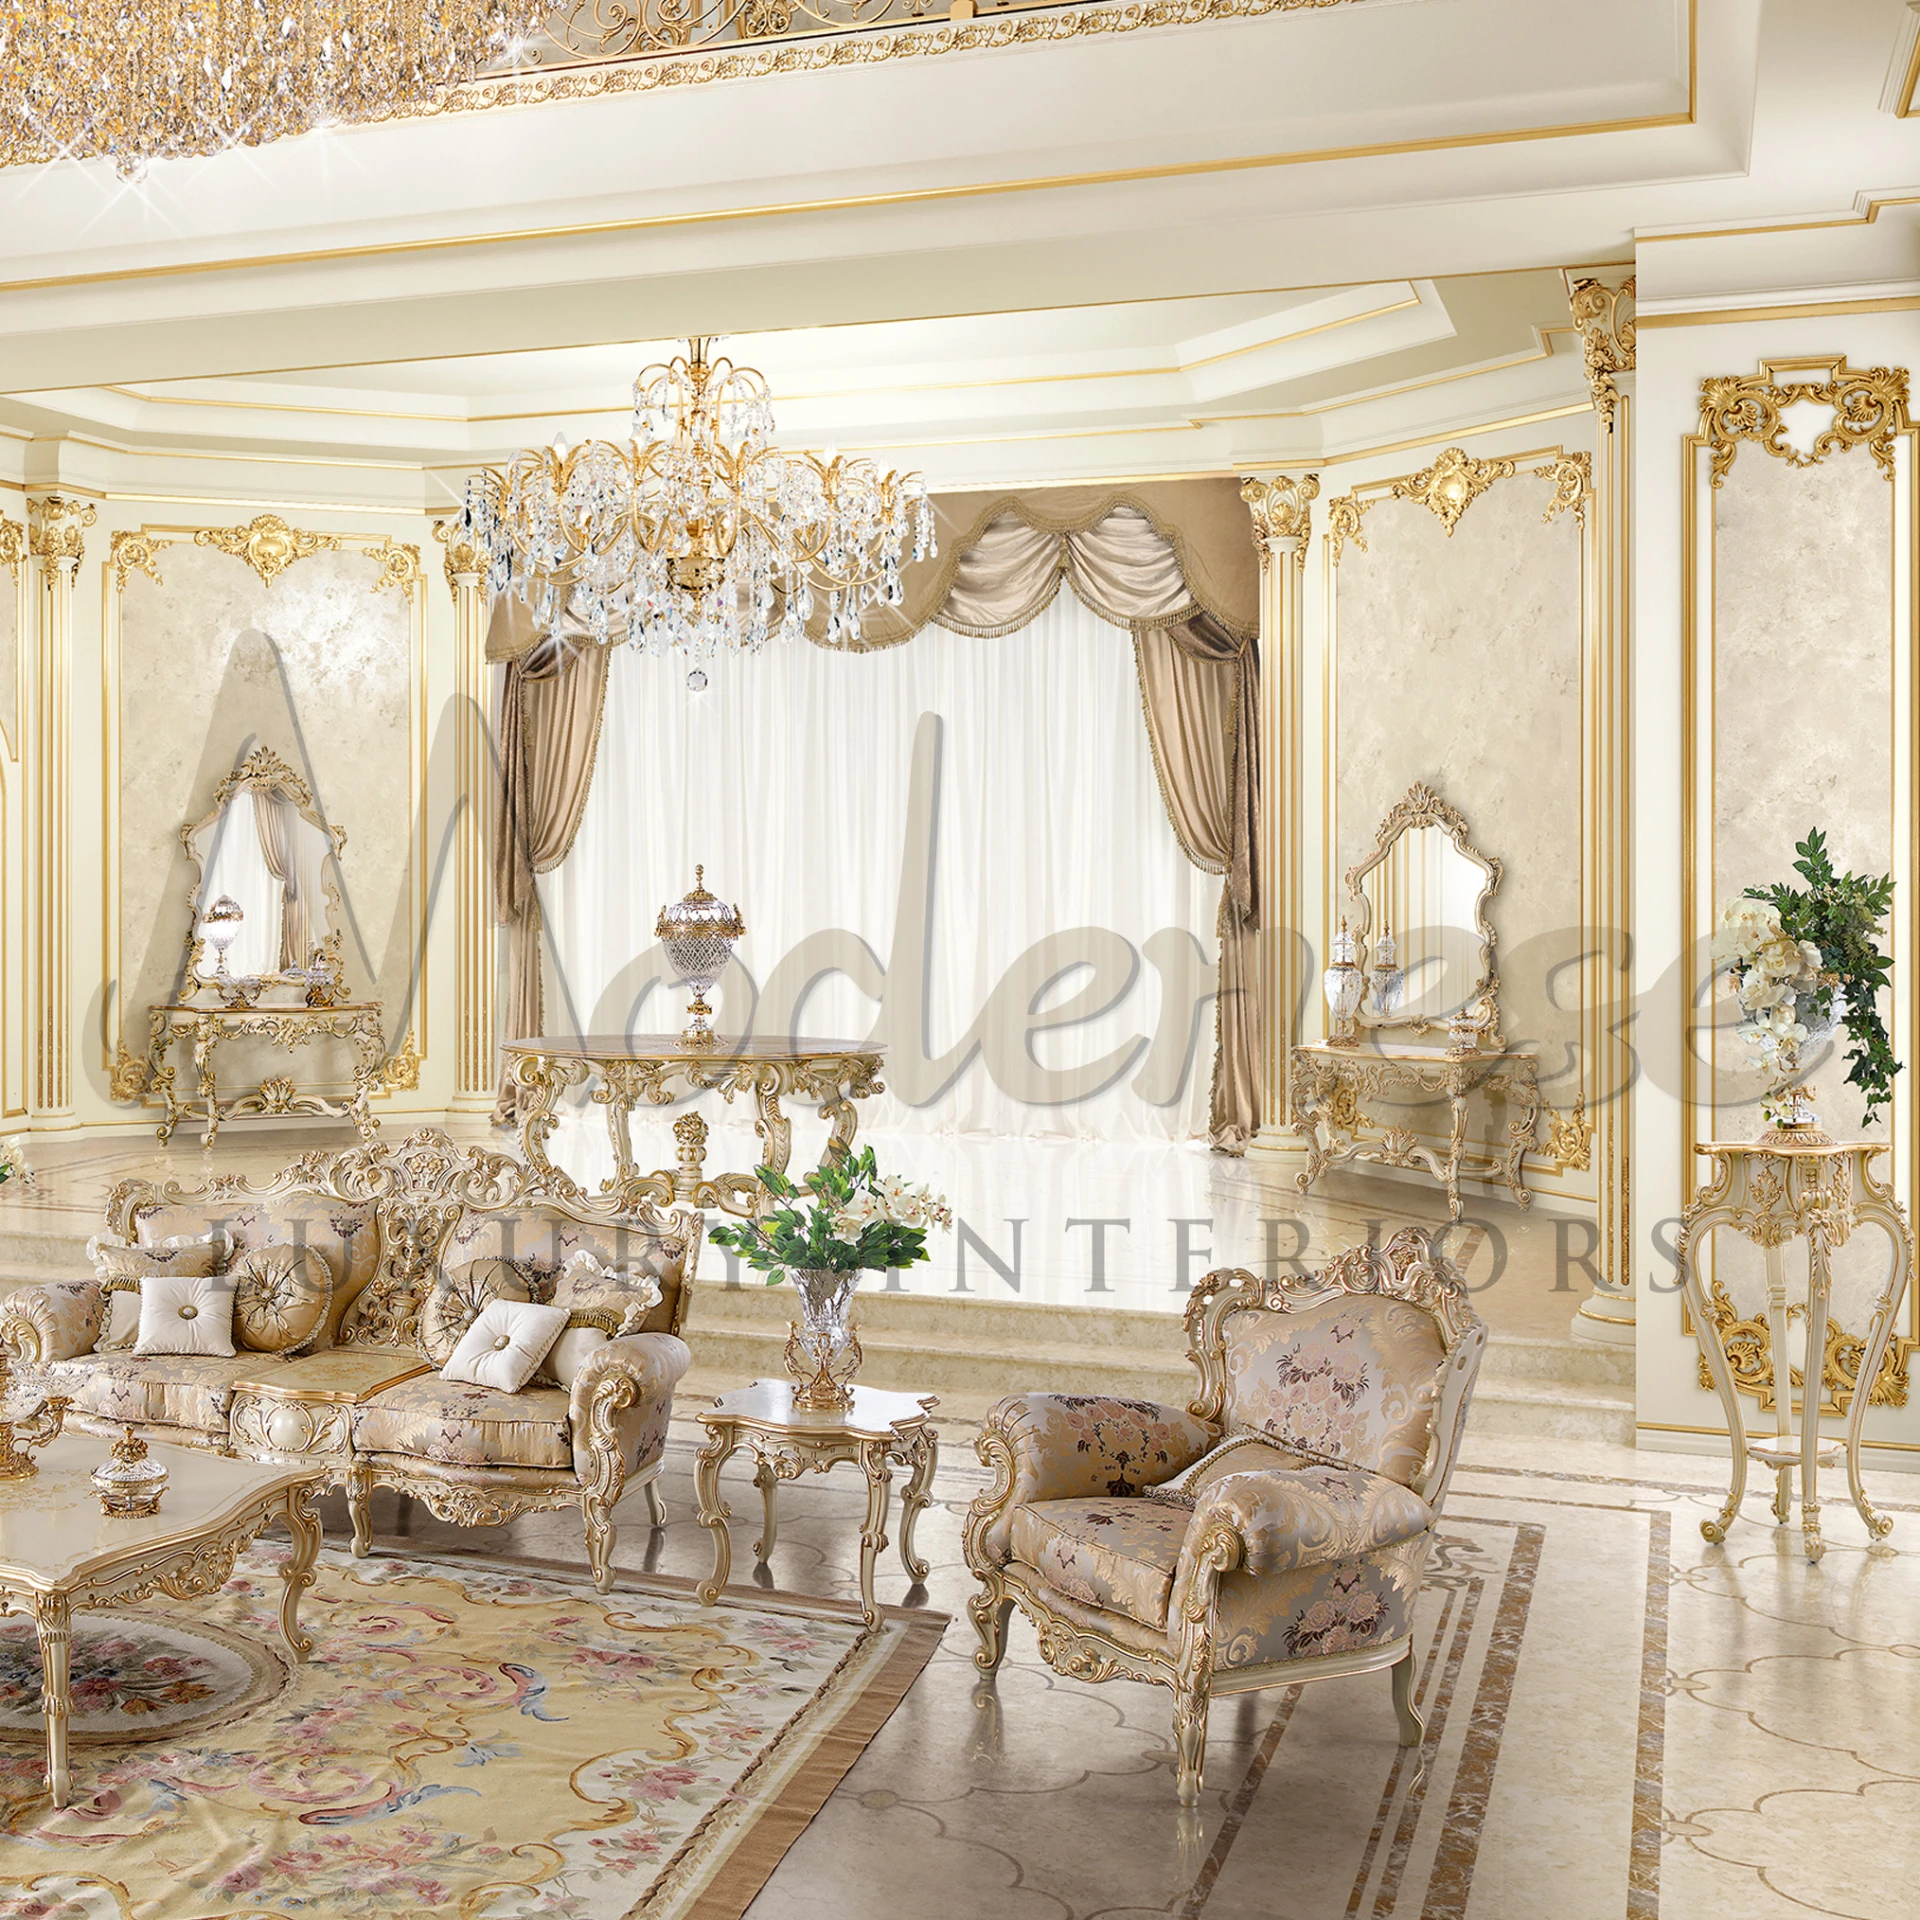 Elegant drawing-room with golden gilded furniture and an Italian Empire Chandelier.